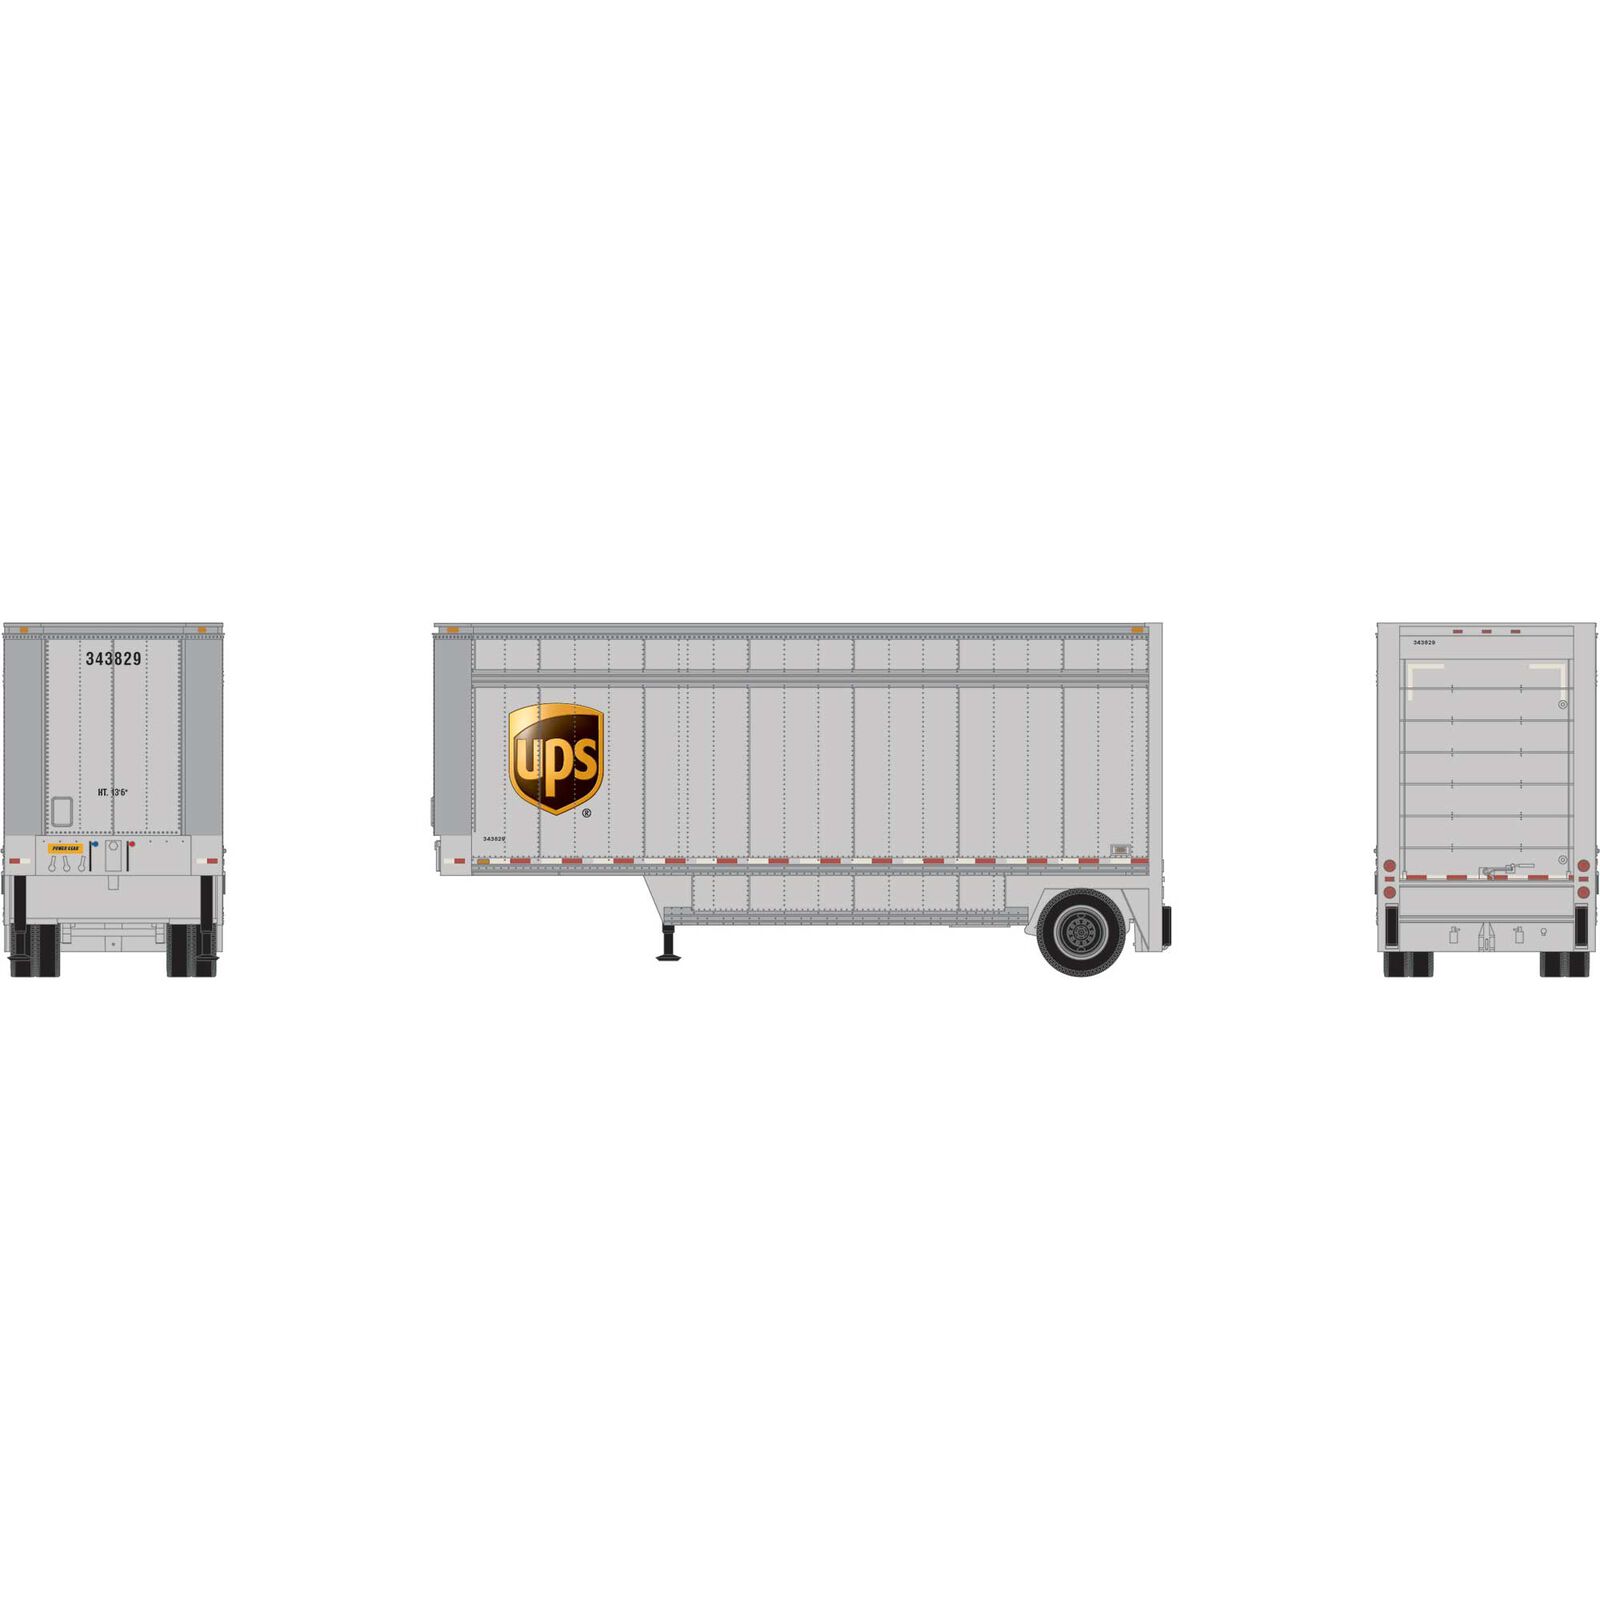 HO RTR 28' Drop Sill Trailer UPS with Shield #343829